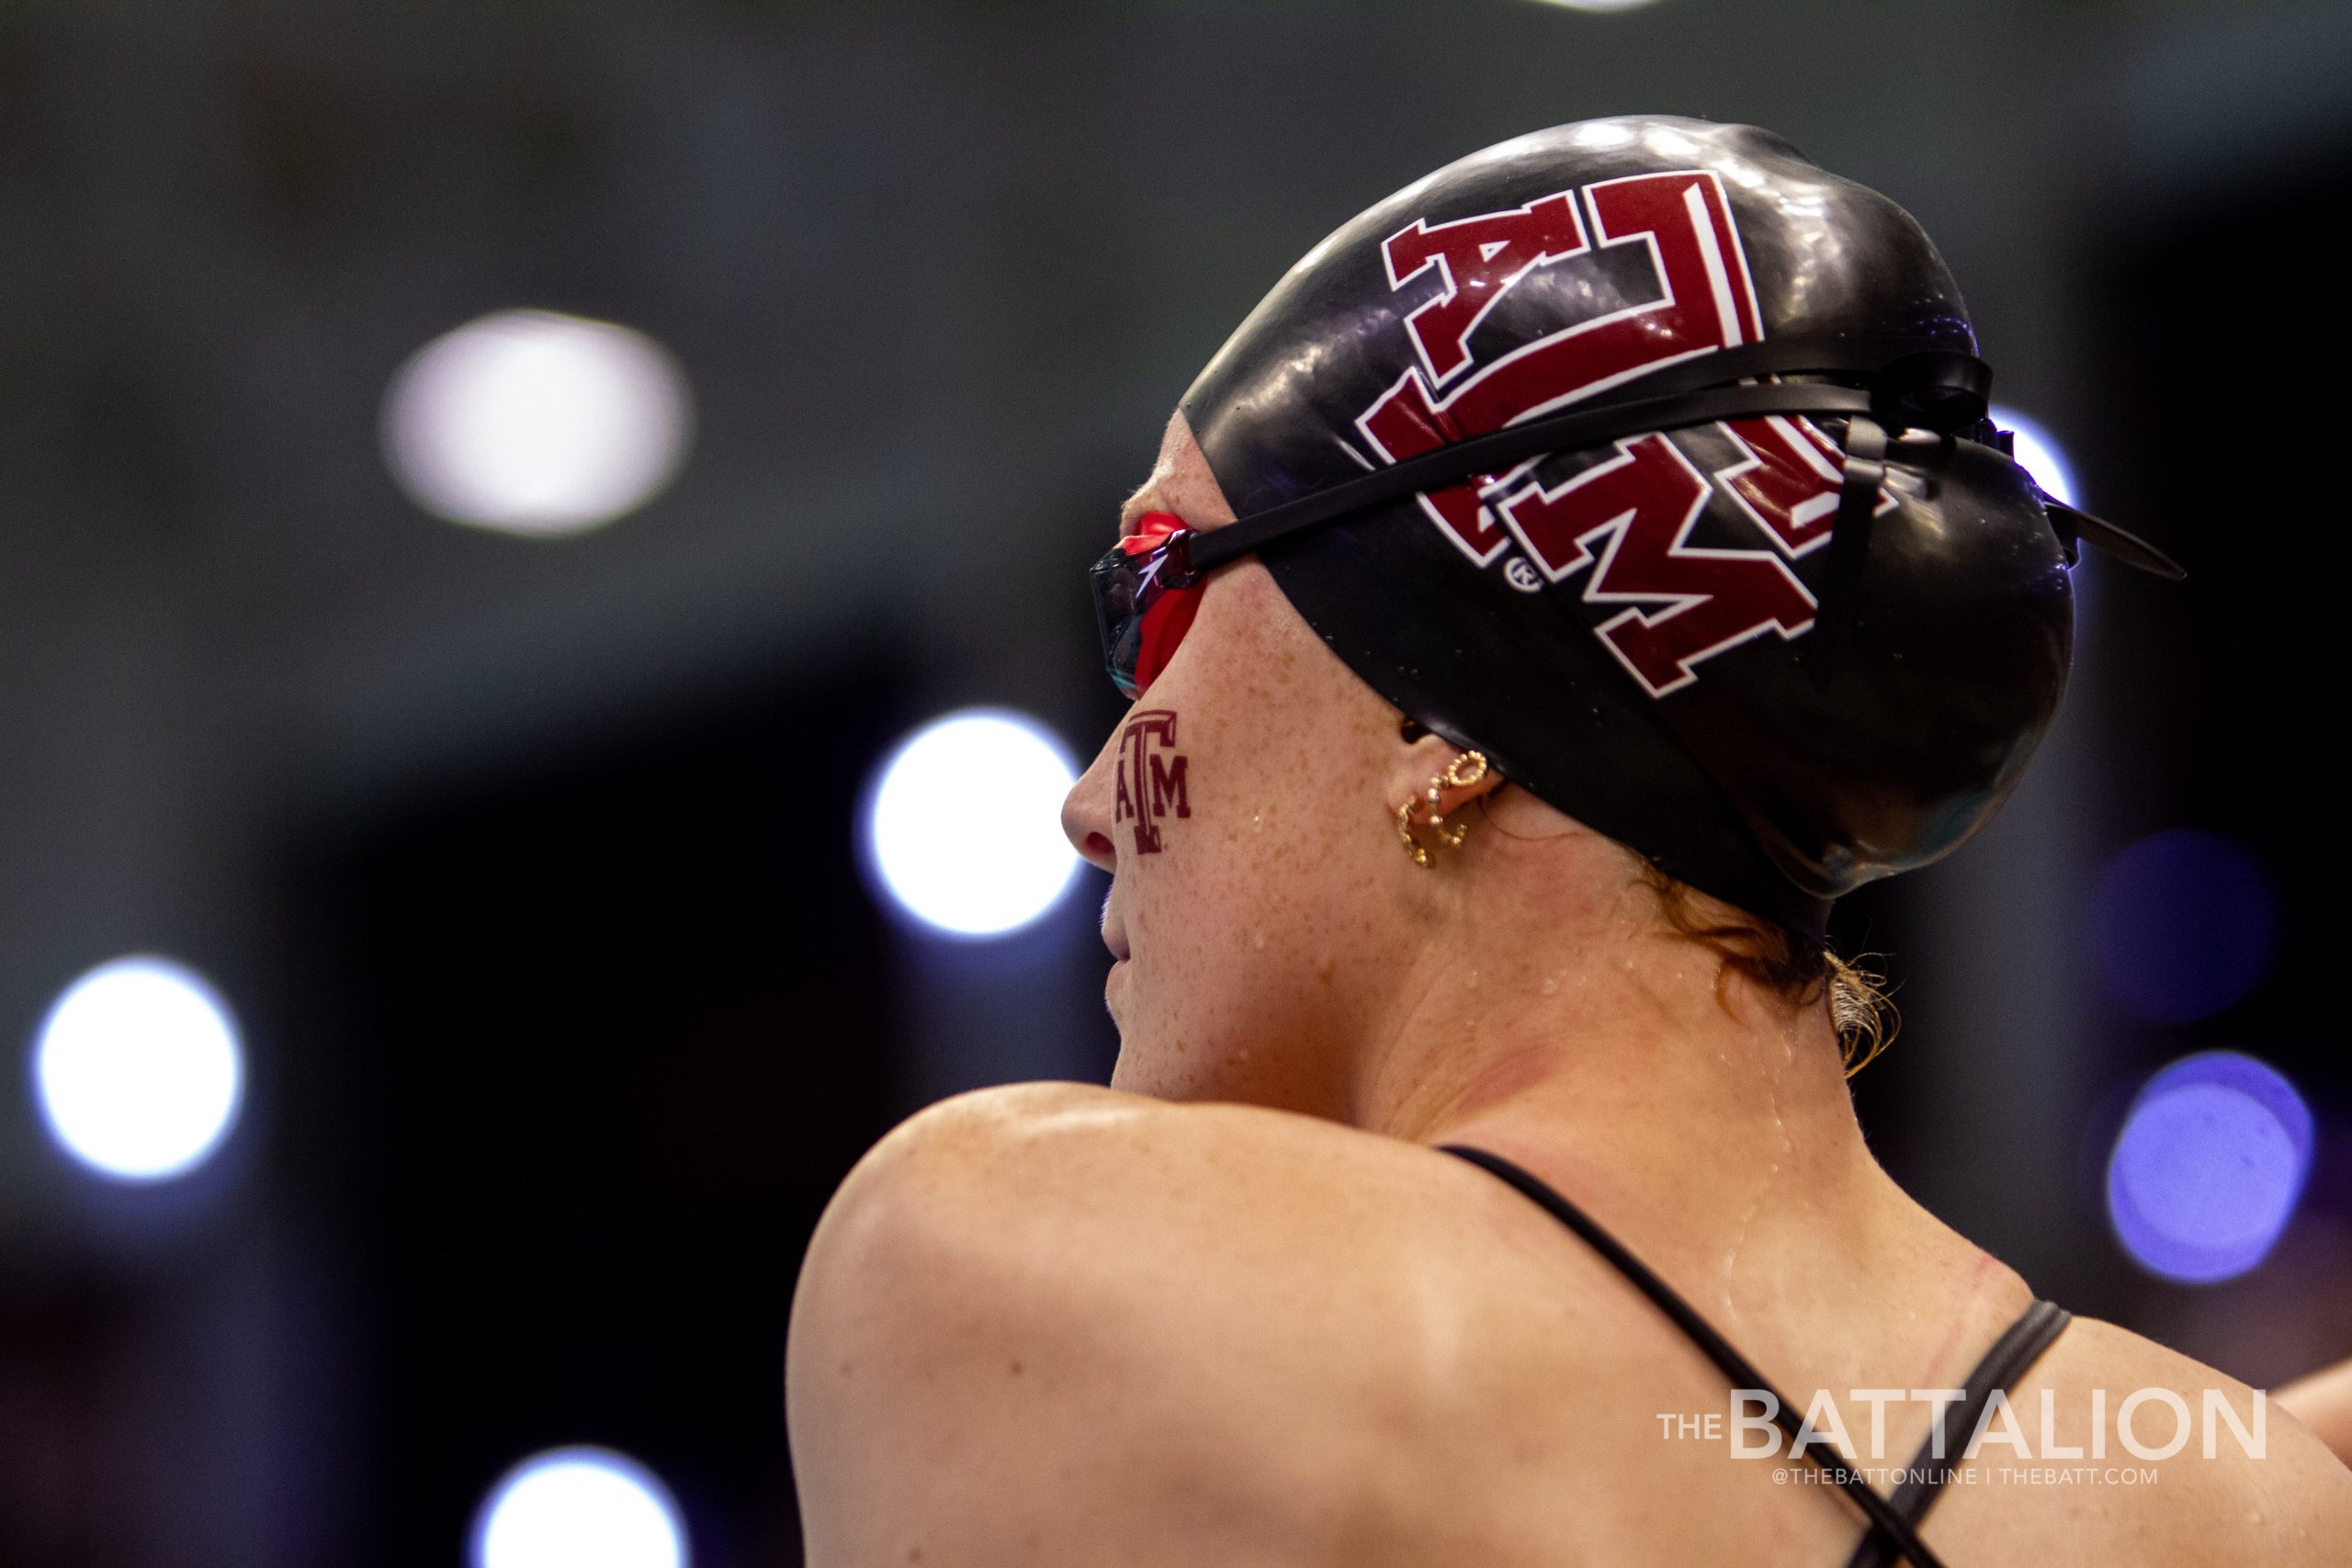 GALLERY%3A+Swimming+%26+Diving+vs.+Texas